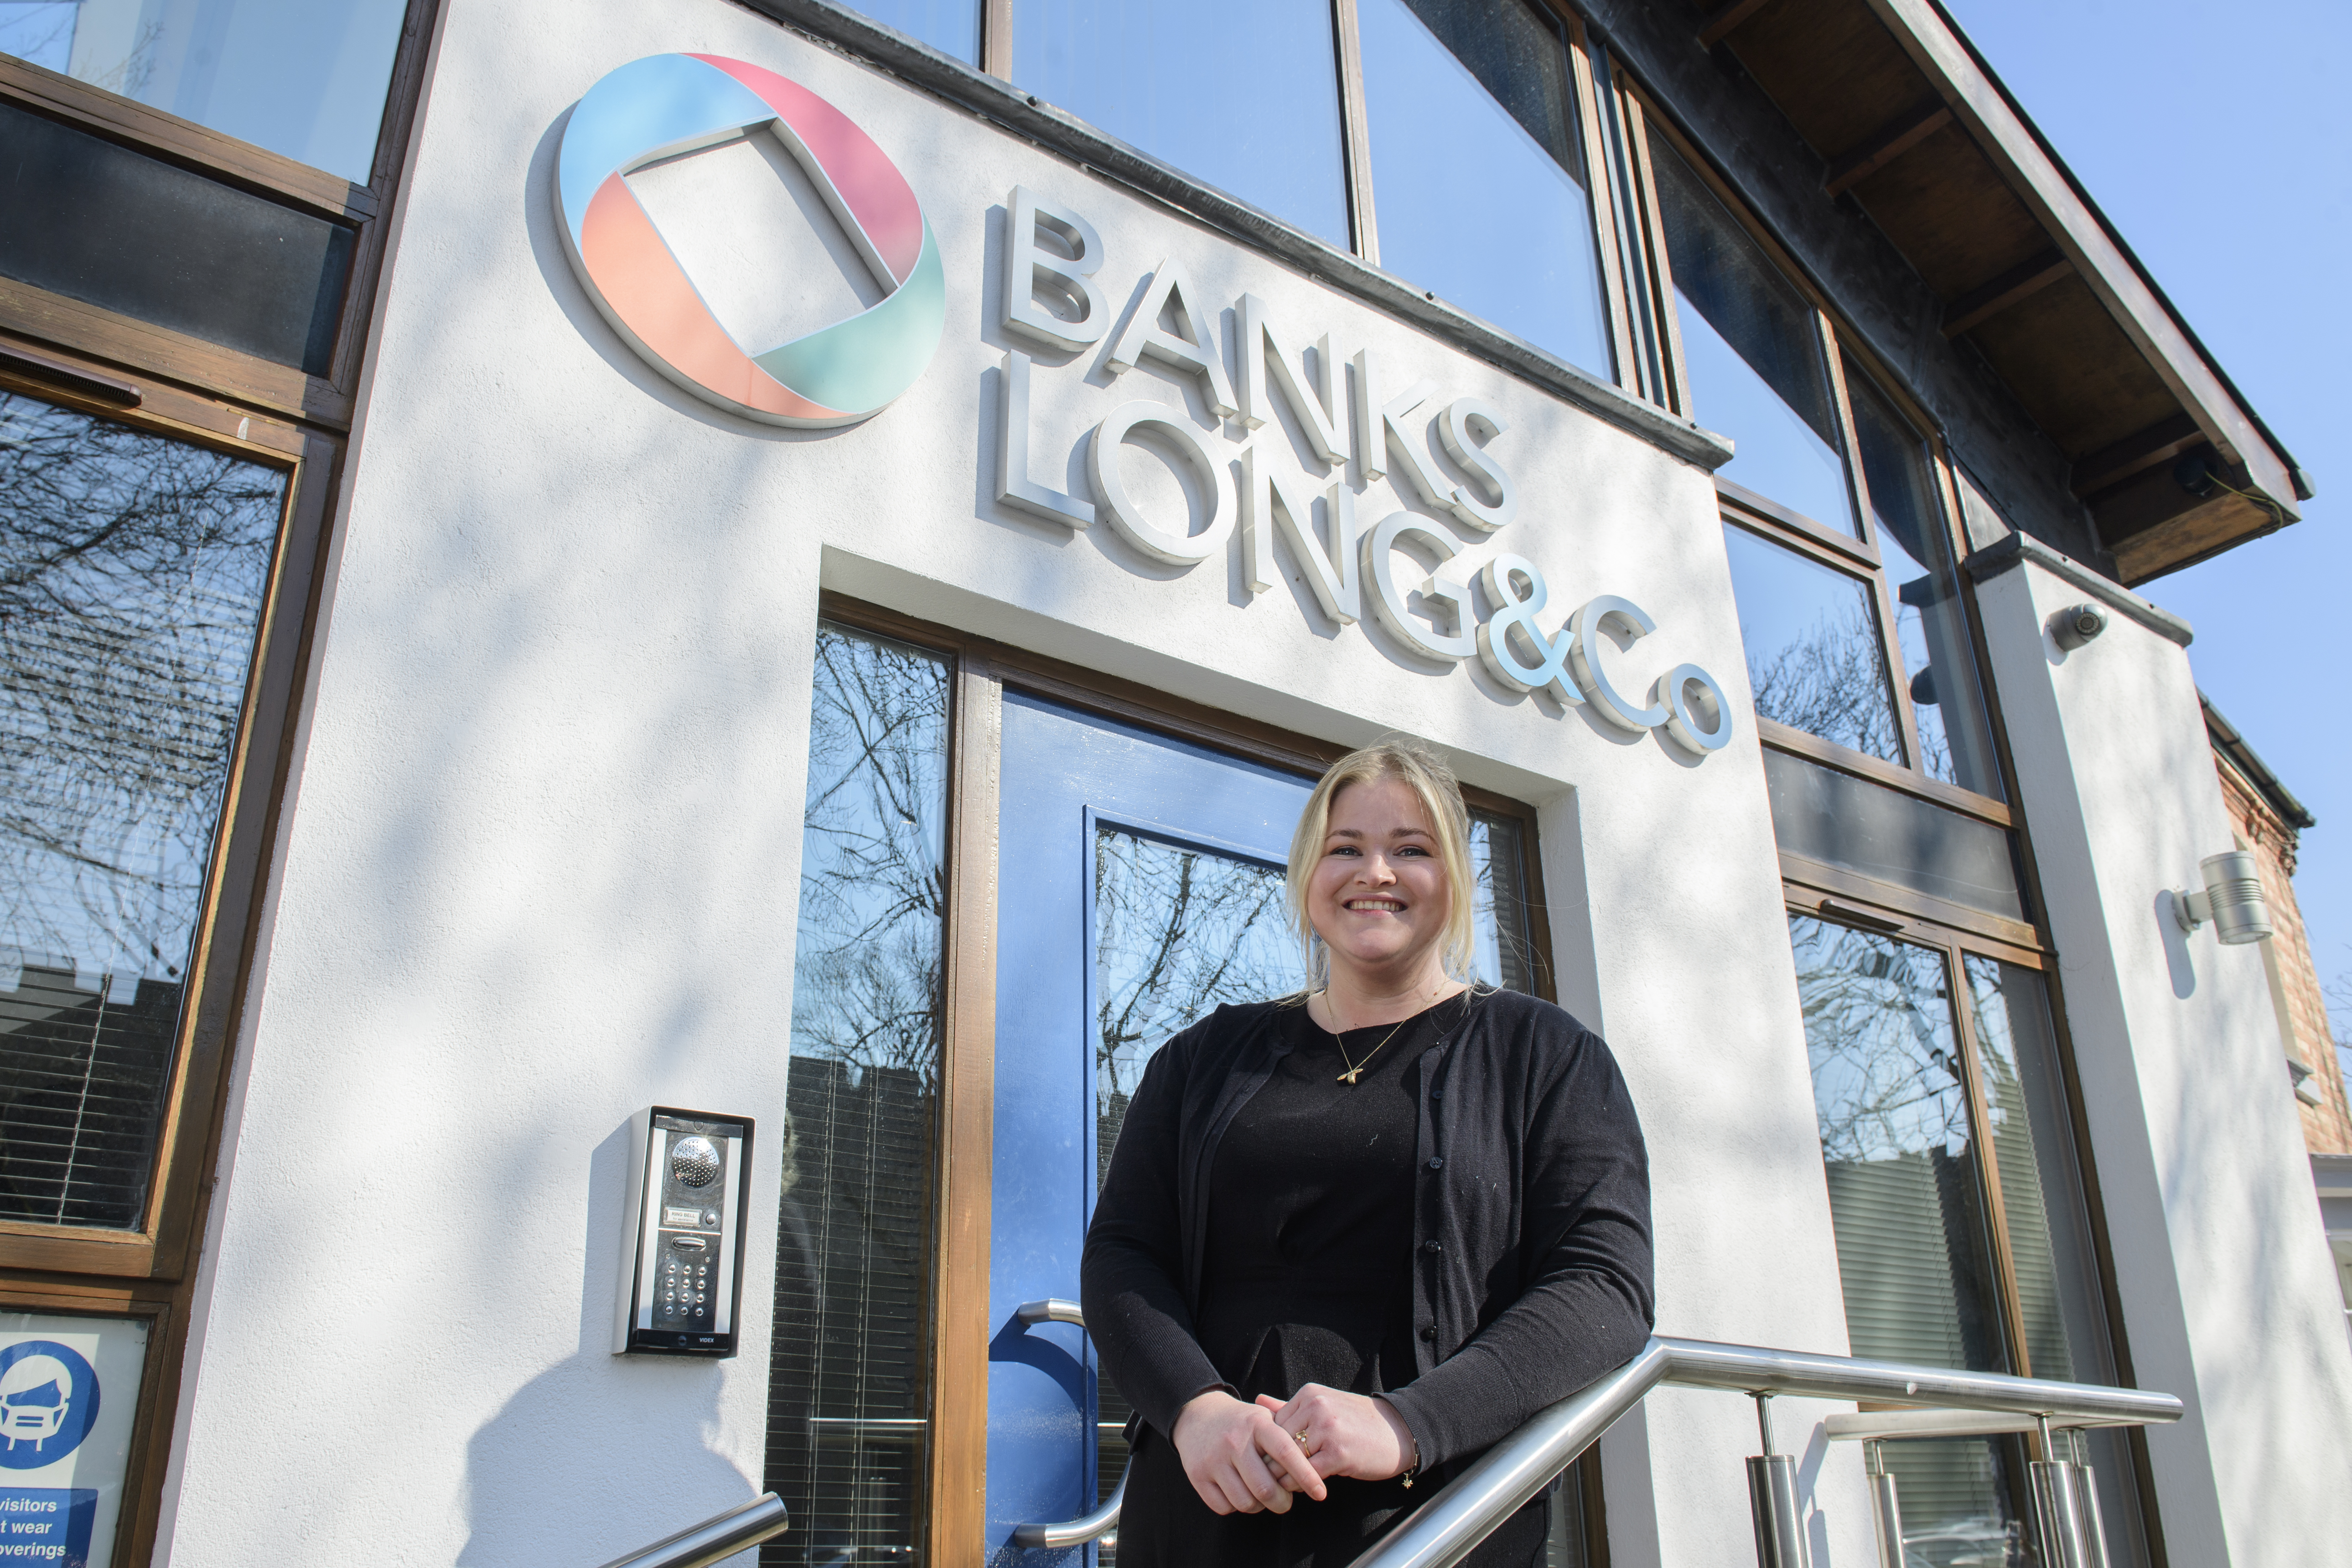 Featured image 1 for BANKS LONG & CO ANNOUNCE NEW ASSOCIATE DIRECTOR